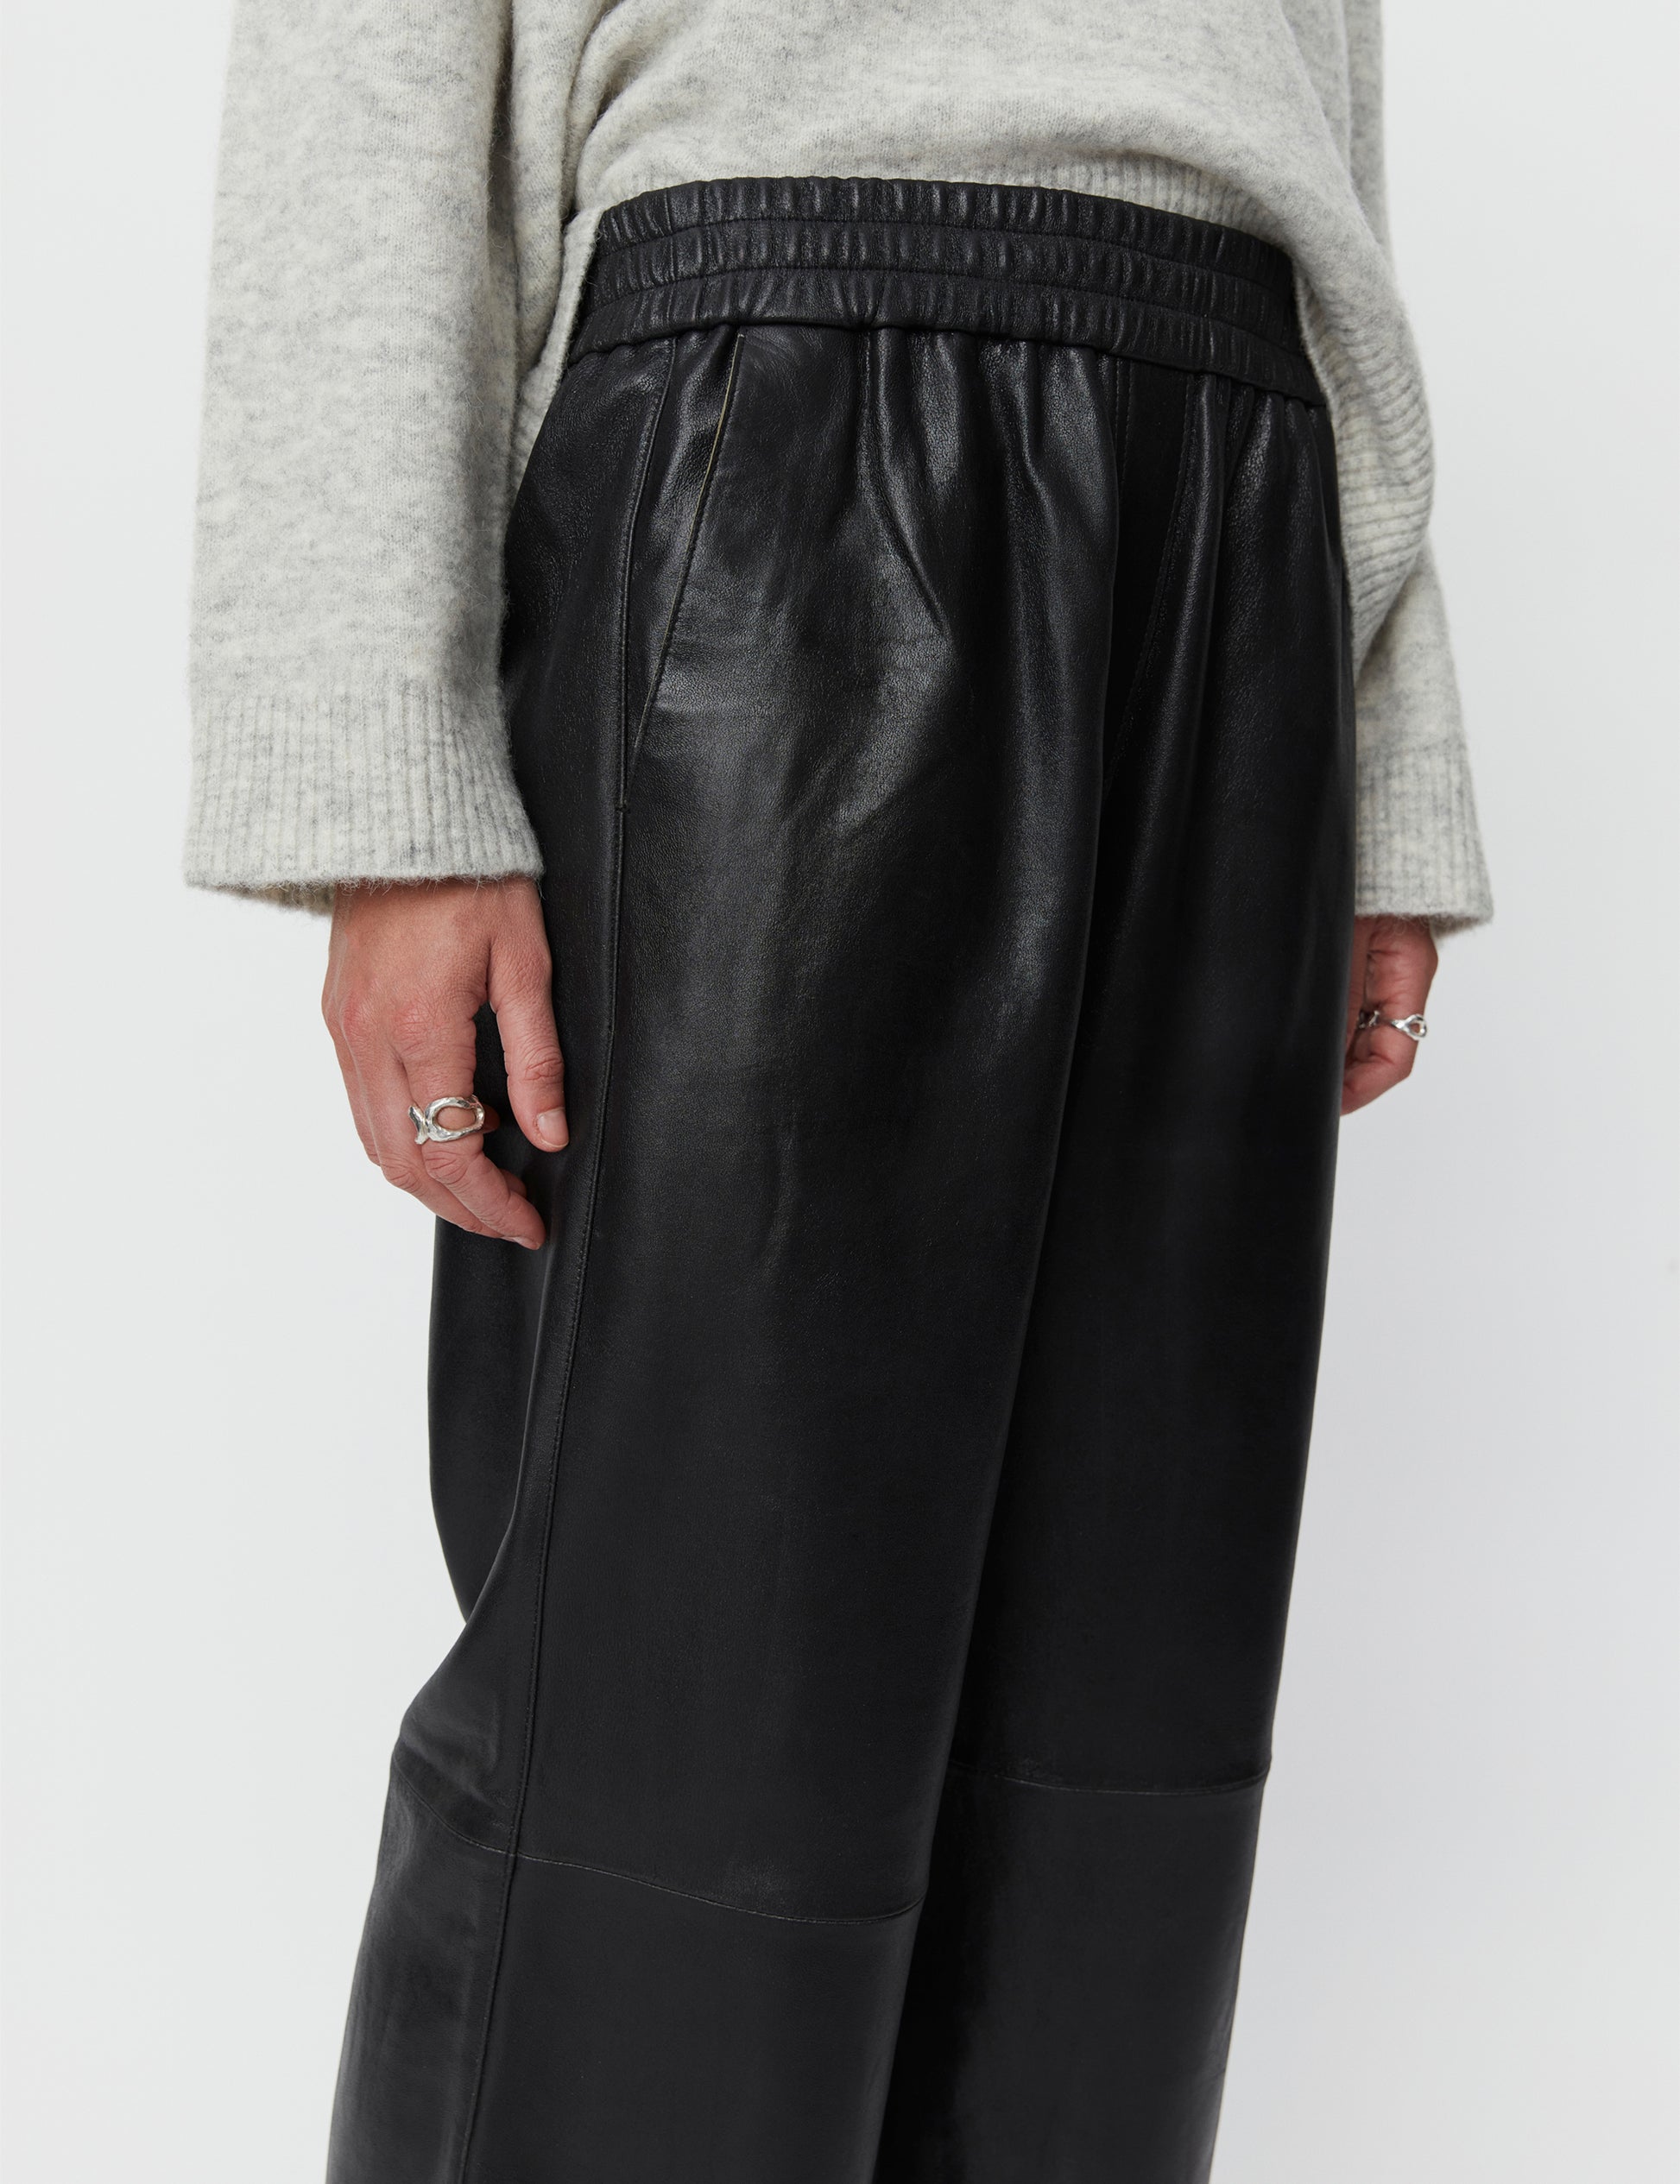 Day Birger - Jonah Polished Leather Wide-Leg Trousers